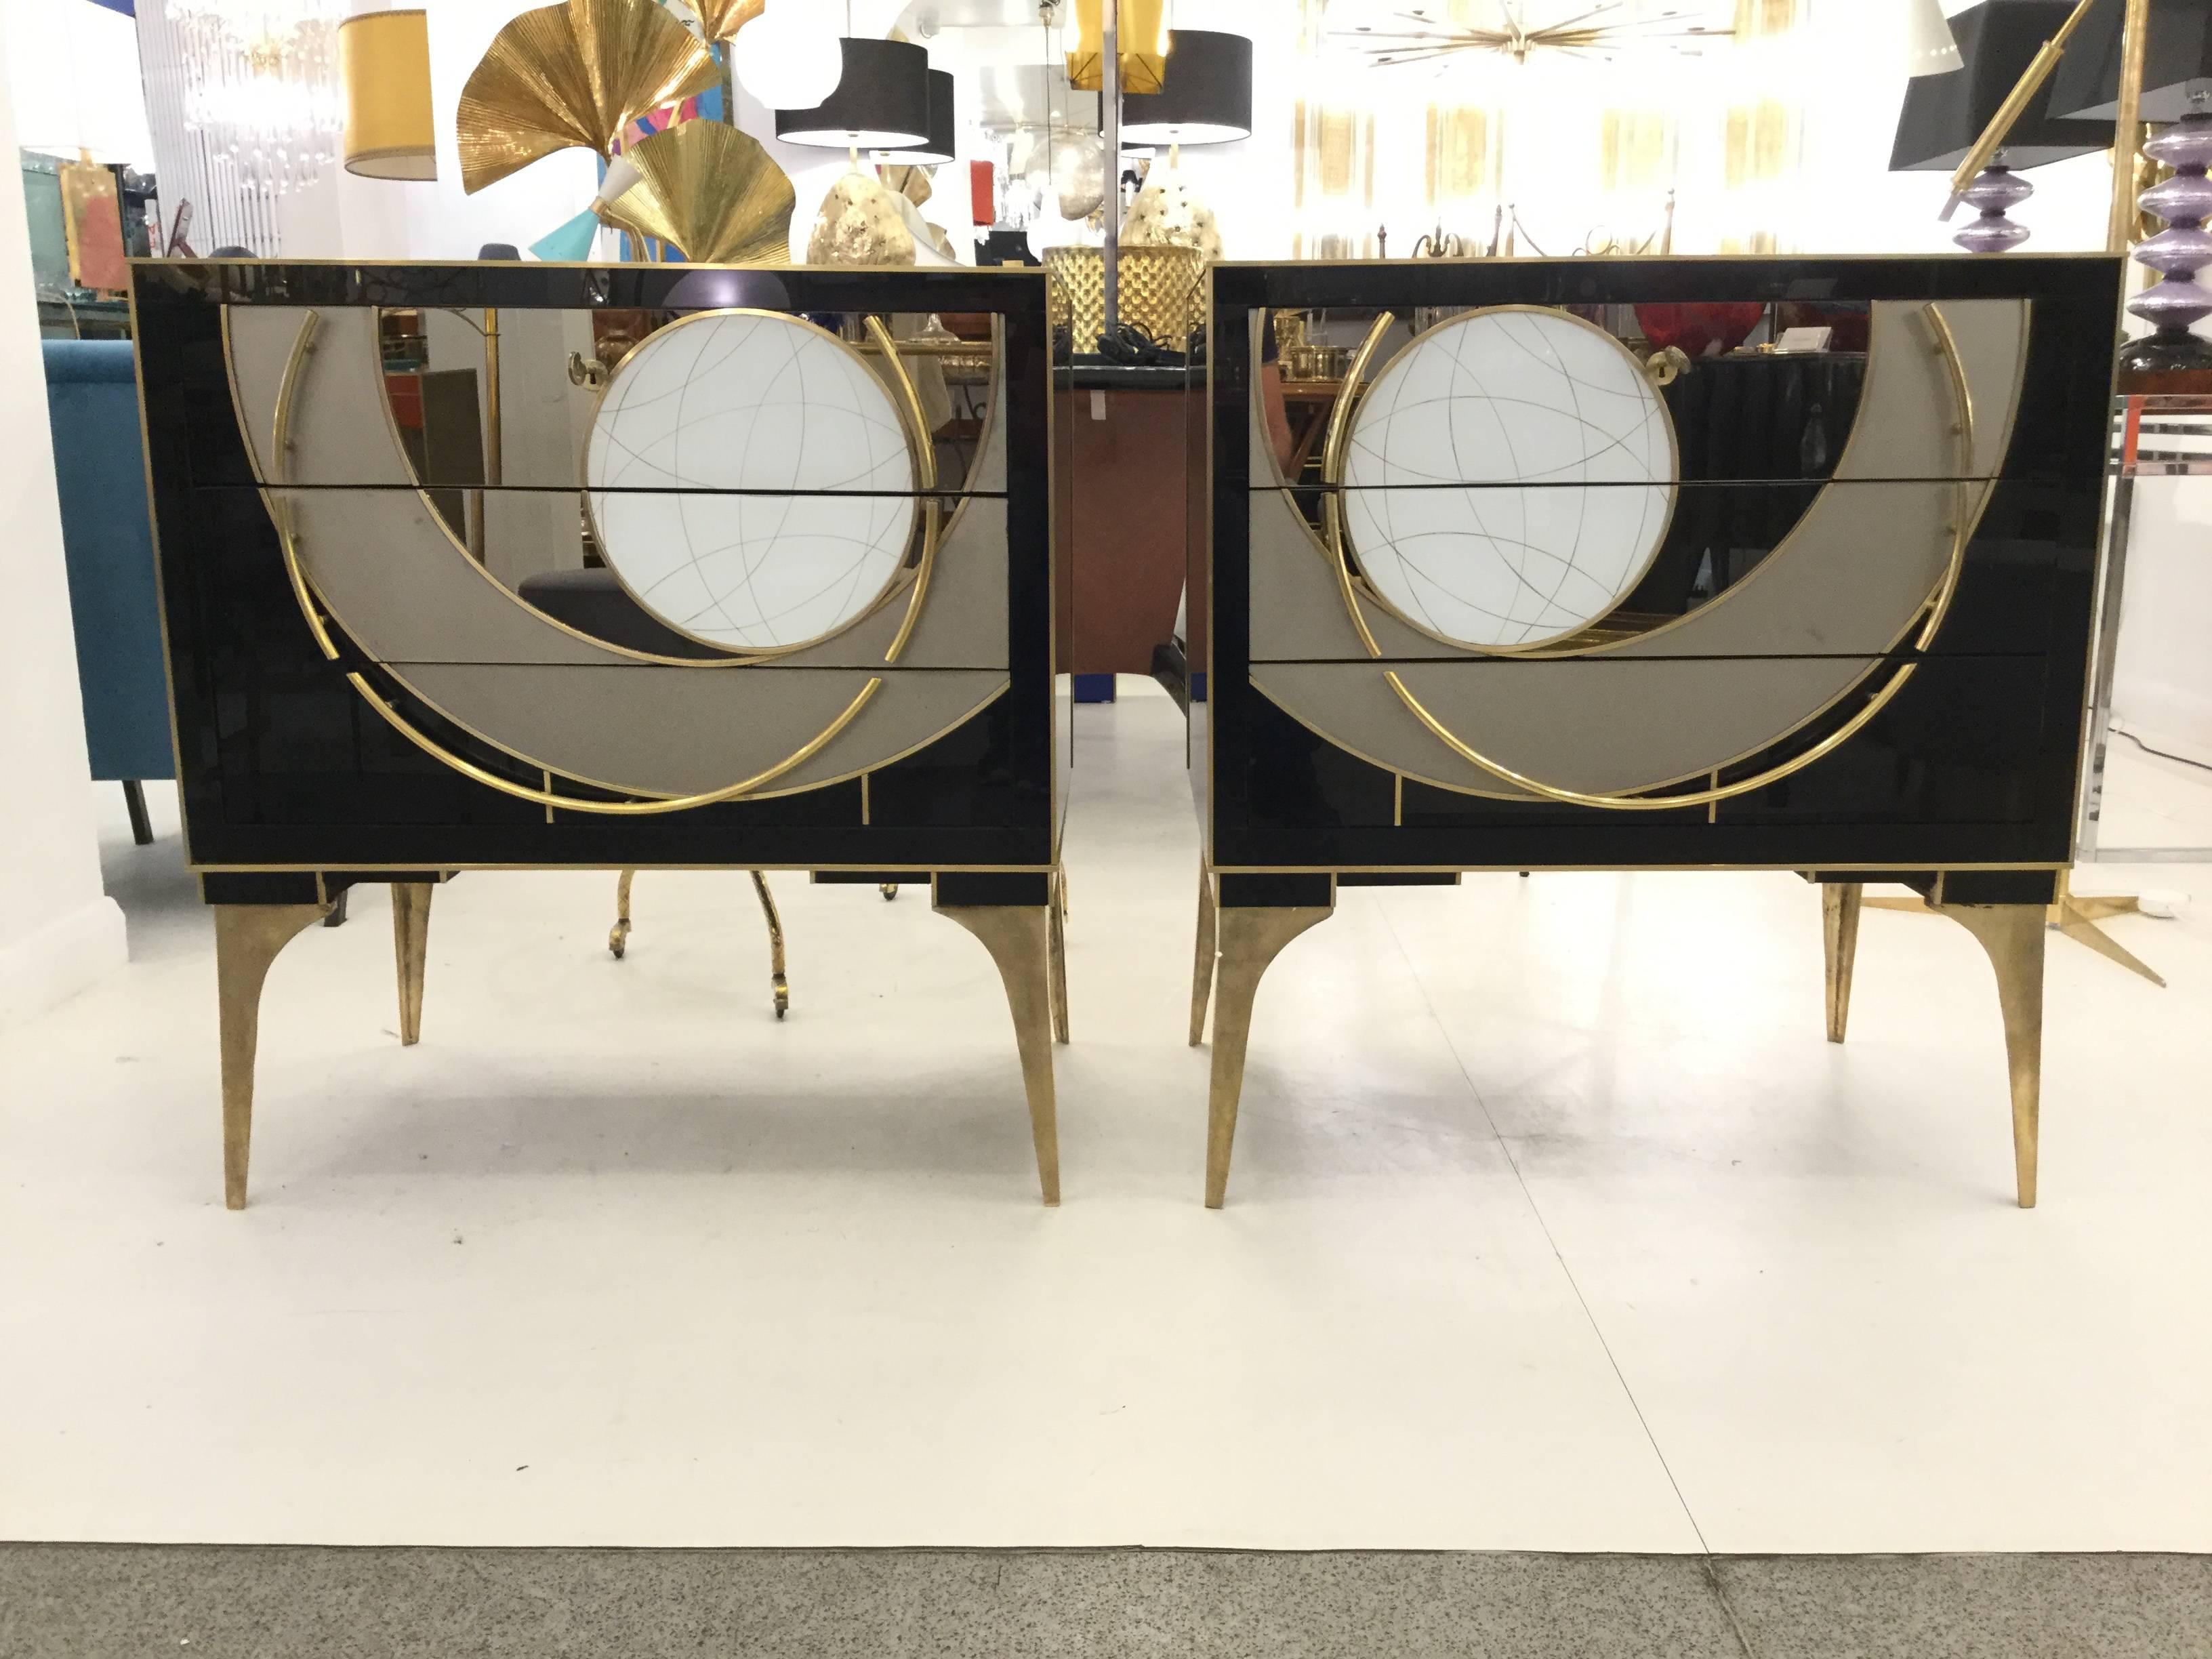 A pair of artistic Italian designed Venetian chests, glass with brass hardware and tapered legs with a geometric design across the three drawers, circa 1970.